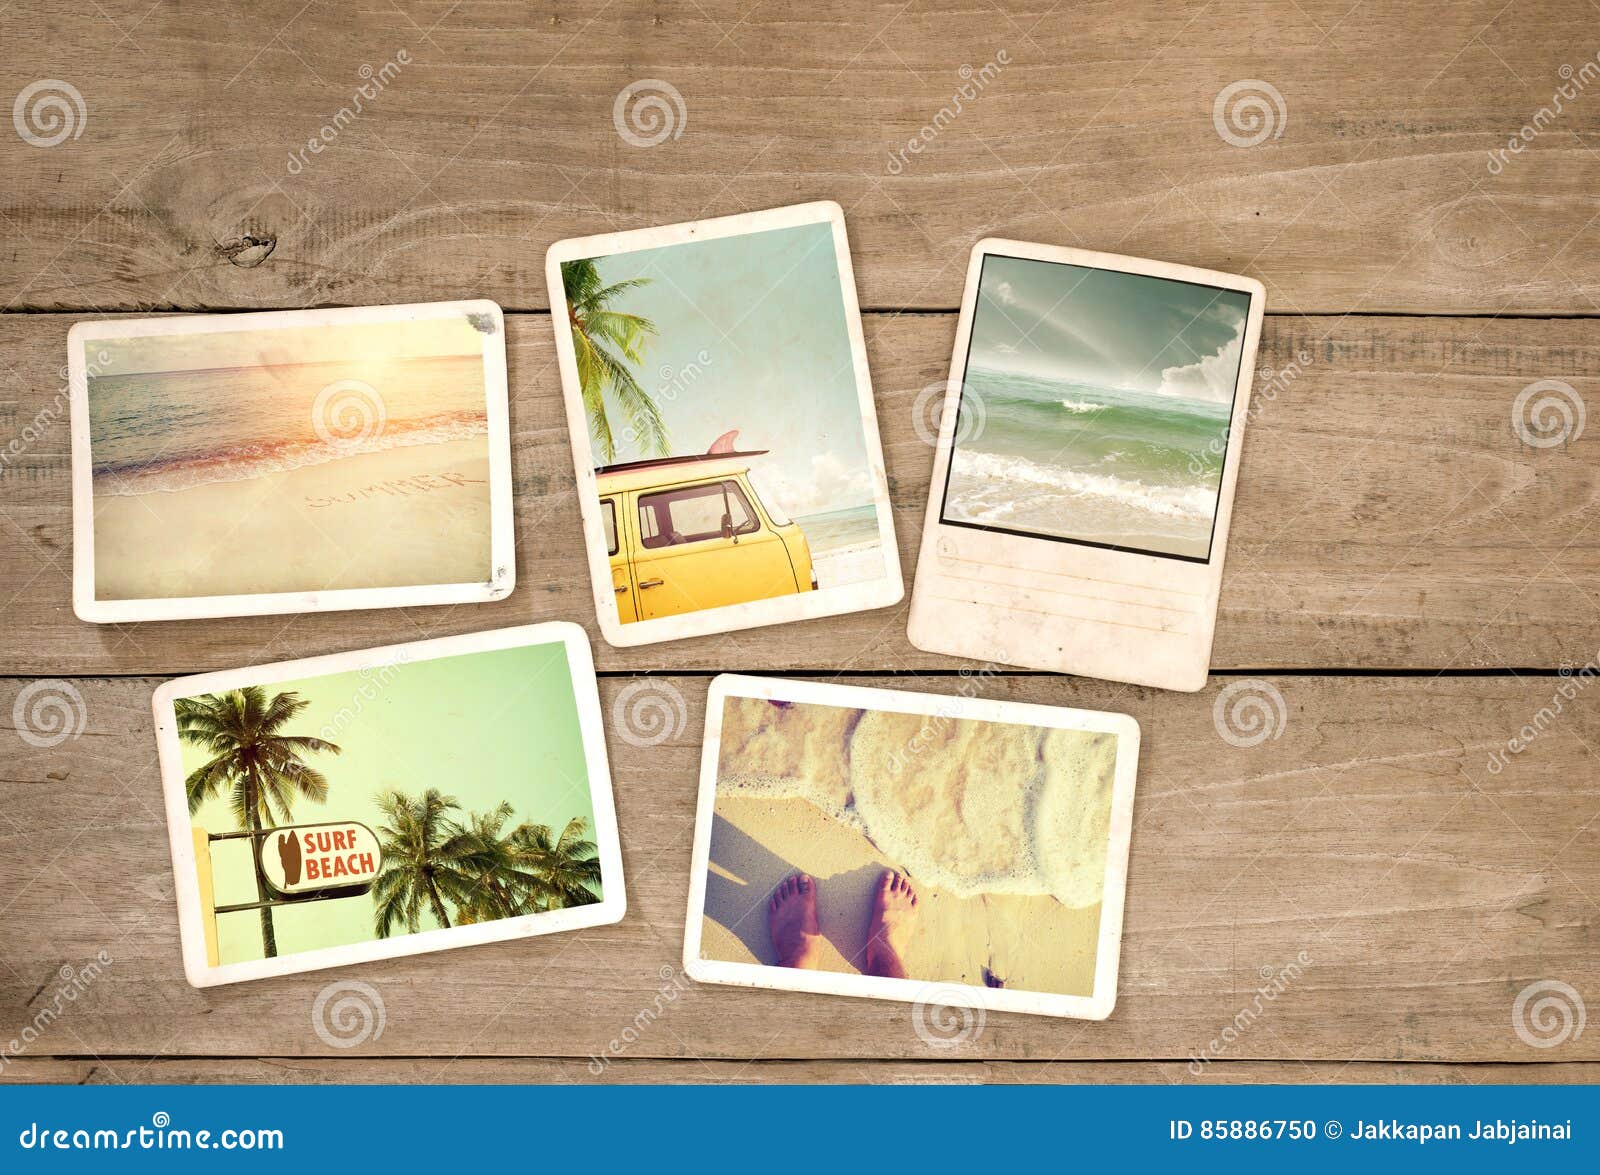 photo album remembrance and nostalgia journey in summer surfing beach trip on wood table.